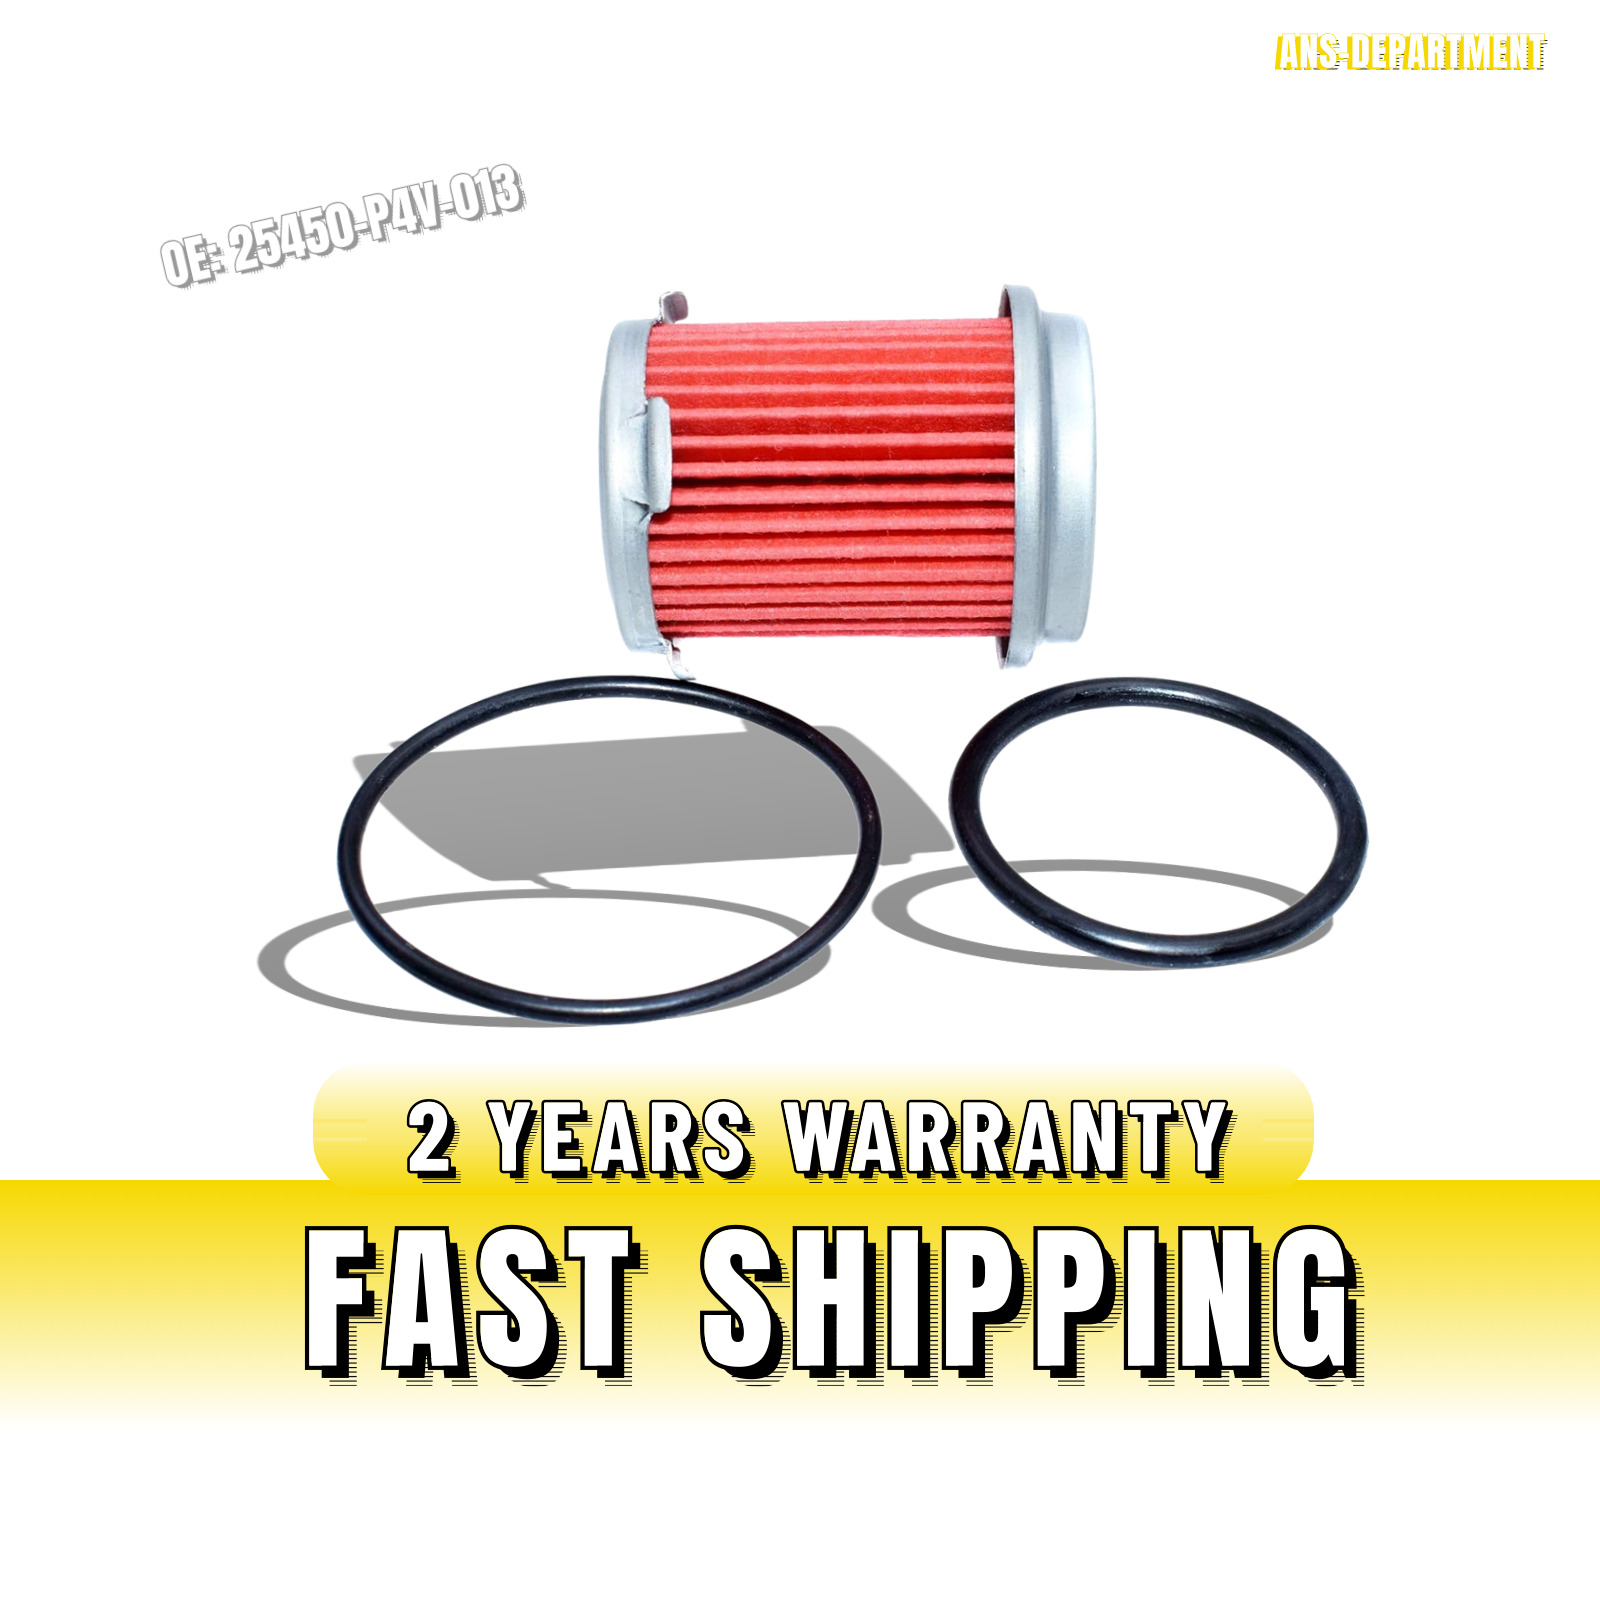 New Automatic Transmission Filter For Acura MDX Honda Accord Pilot 25450-P4V-013